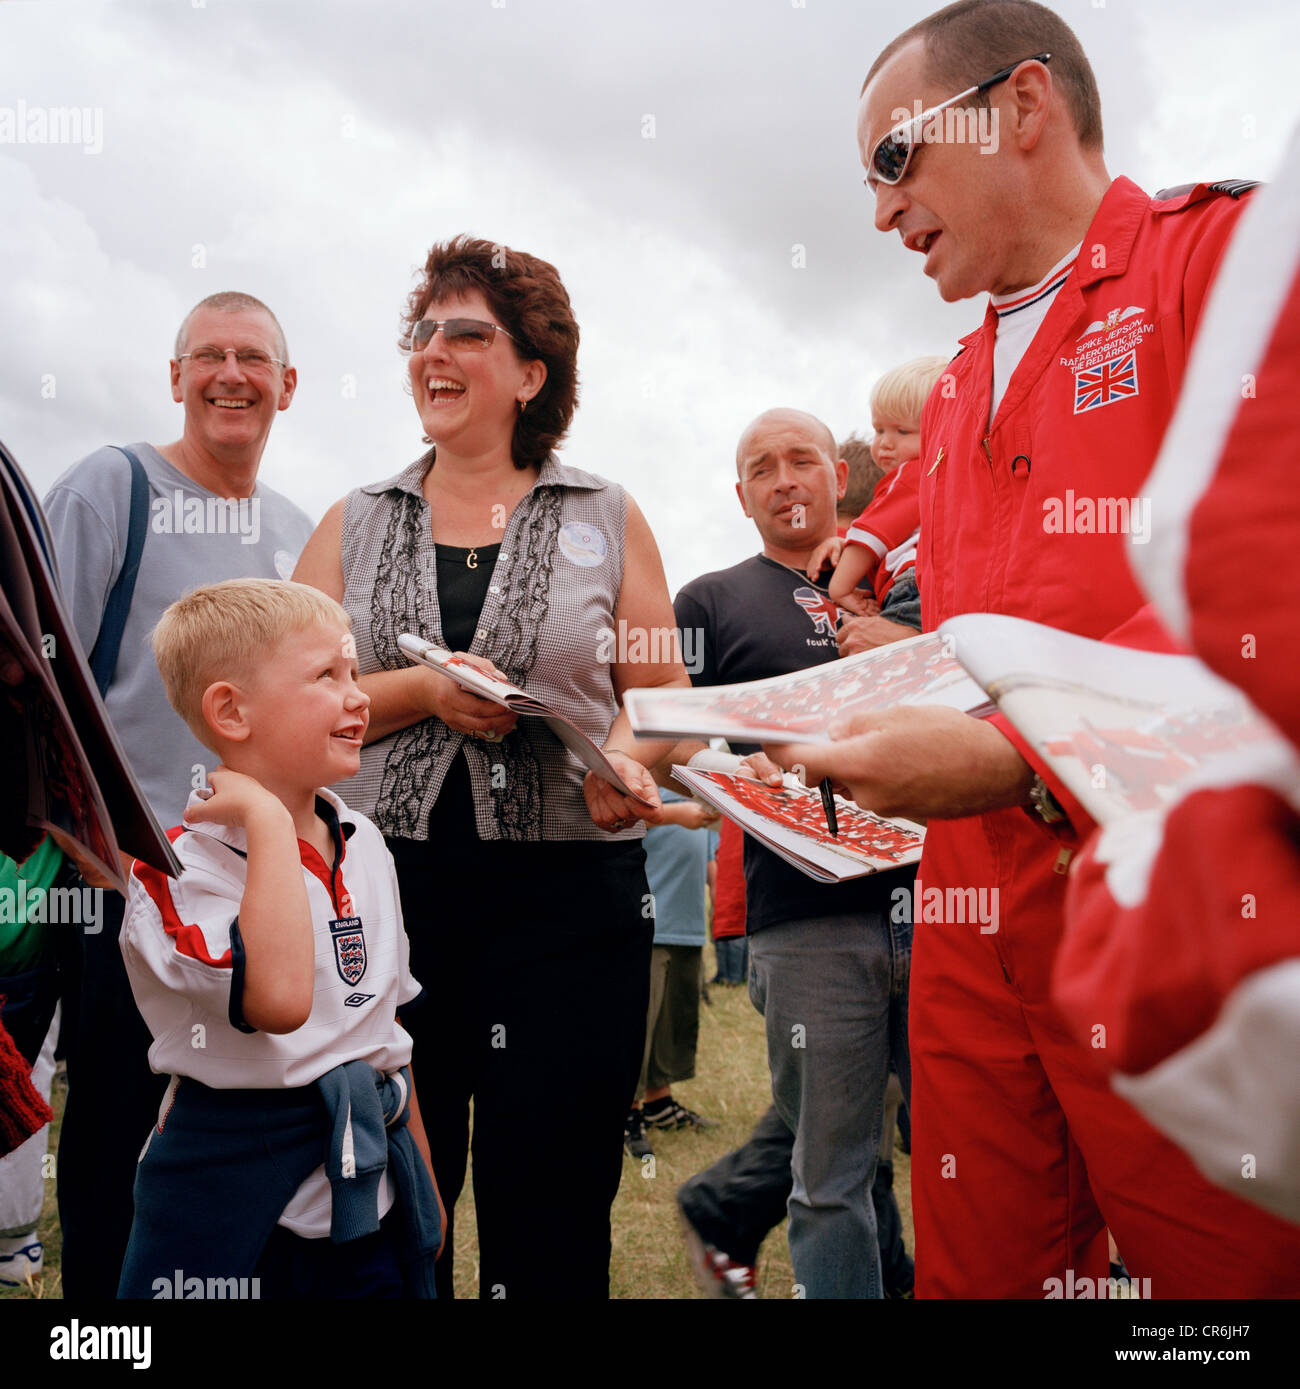 Squadron Leader Spike Jepson of the Red Arrows, Britain's RAF aerobatic team signs publicity brochures for boy during airshow. Stock Photo